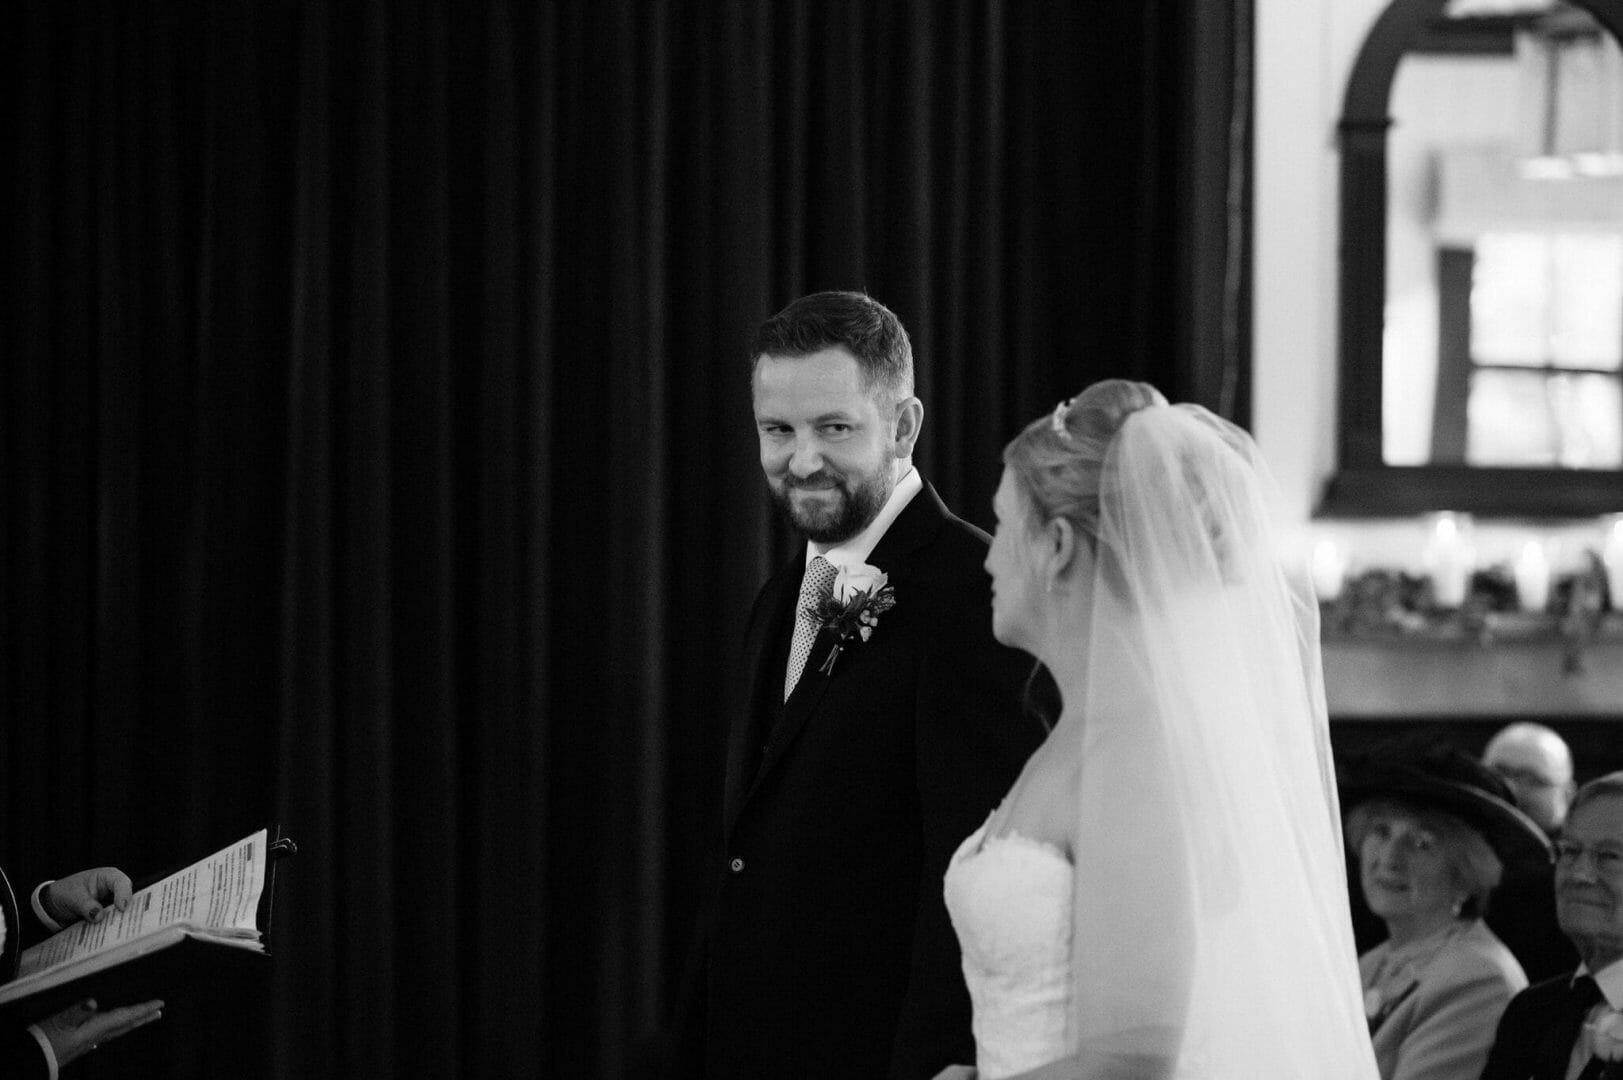 A knowing look from the groom to his bride at Larmertree gardens